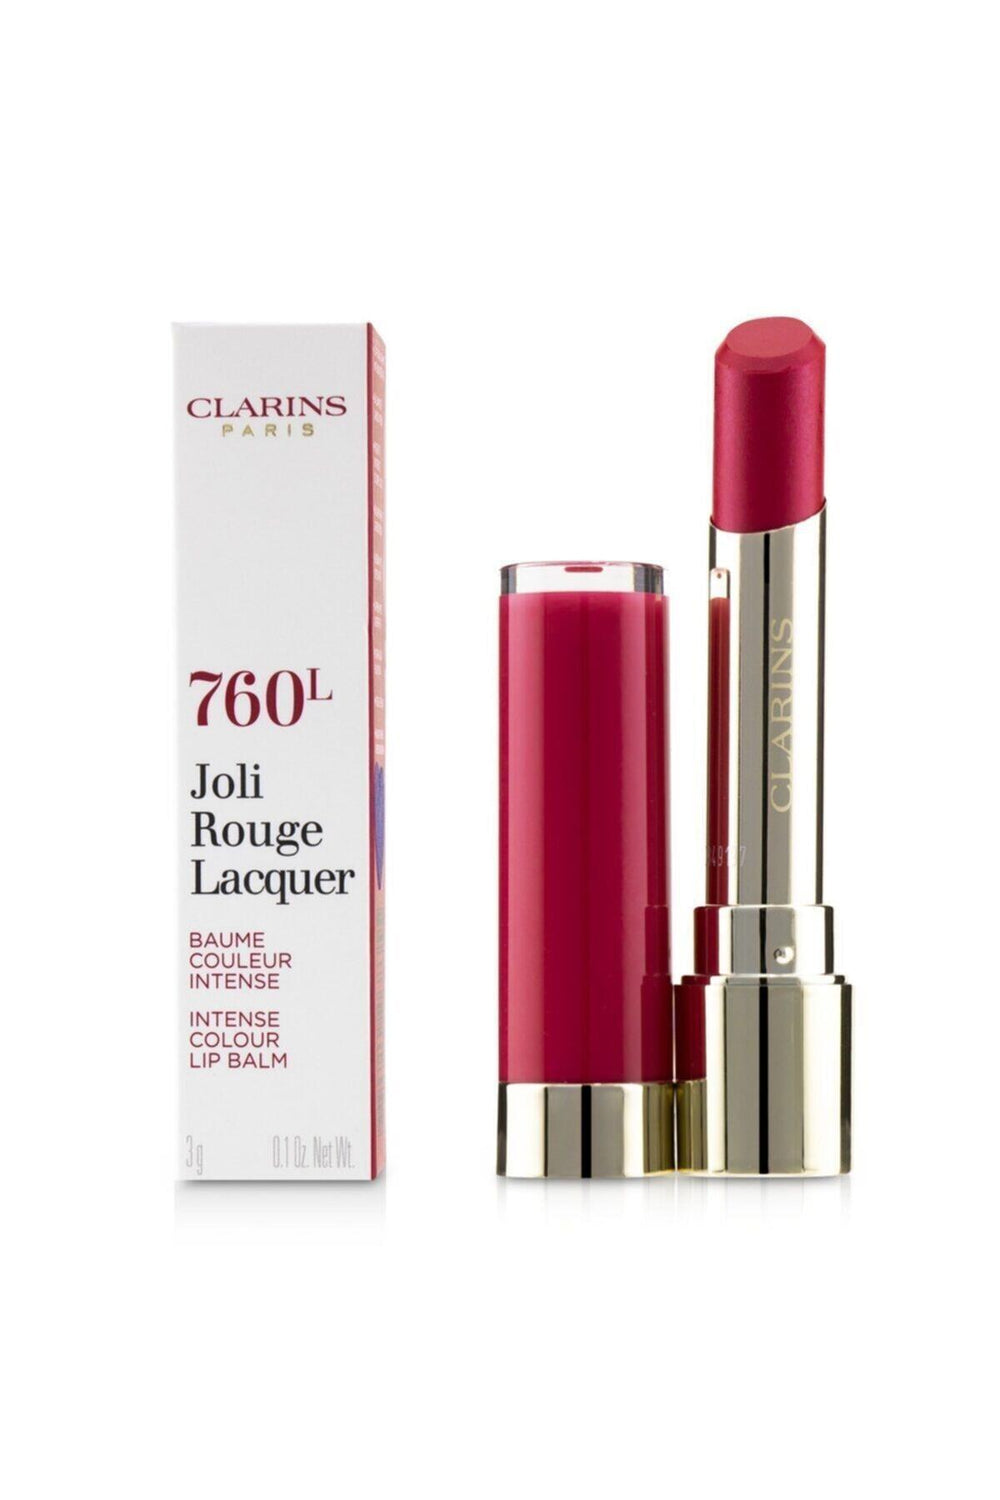 Clarins Joli Rouge Lacquer 760 Pink Cranberry Ruj